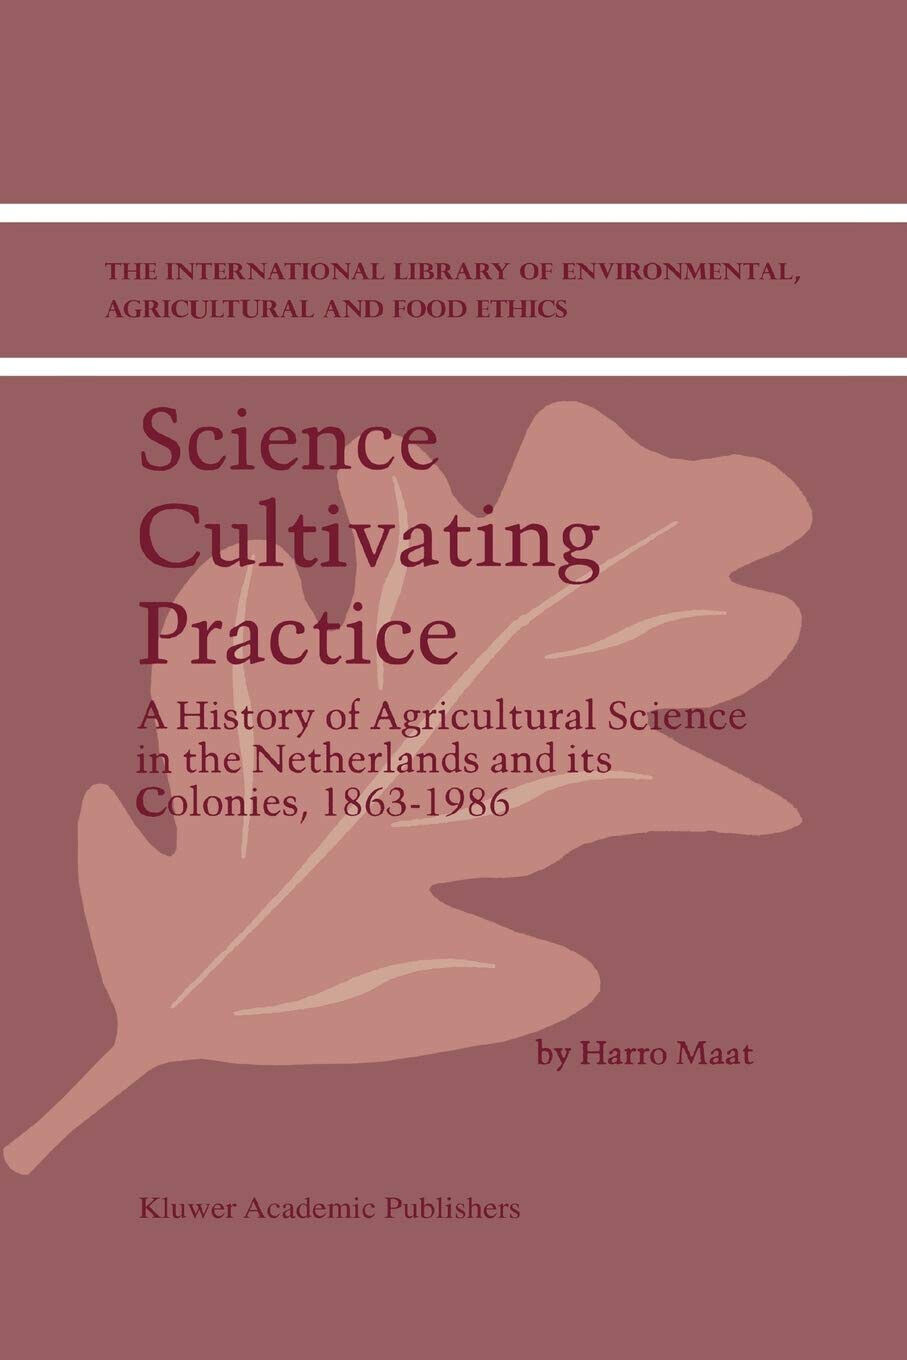 Science Cultivating Practice - H. Maat - Springer, 2010